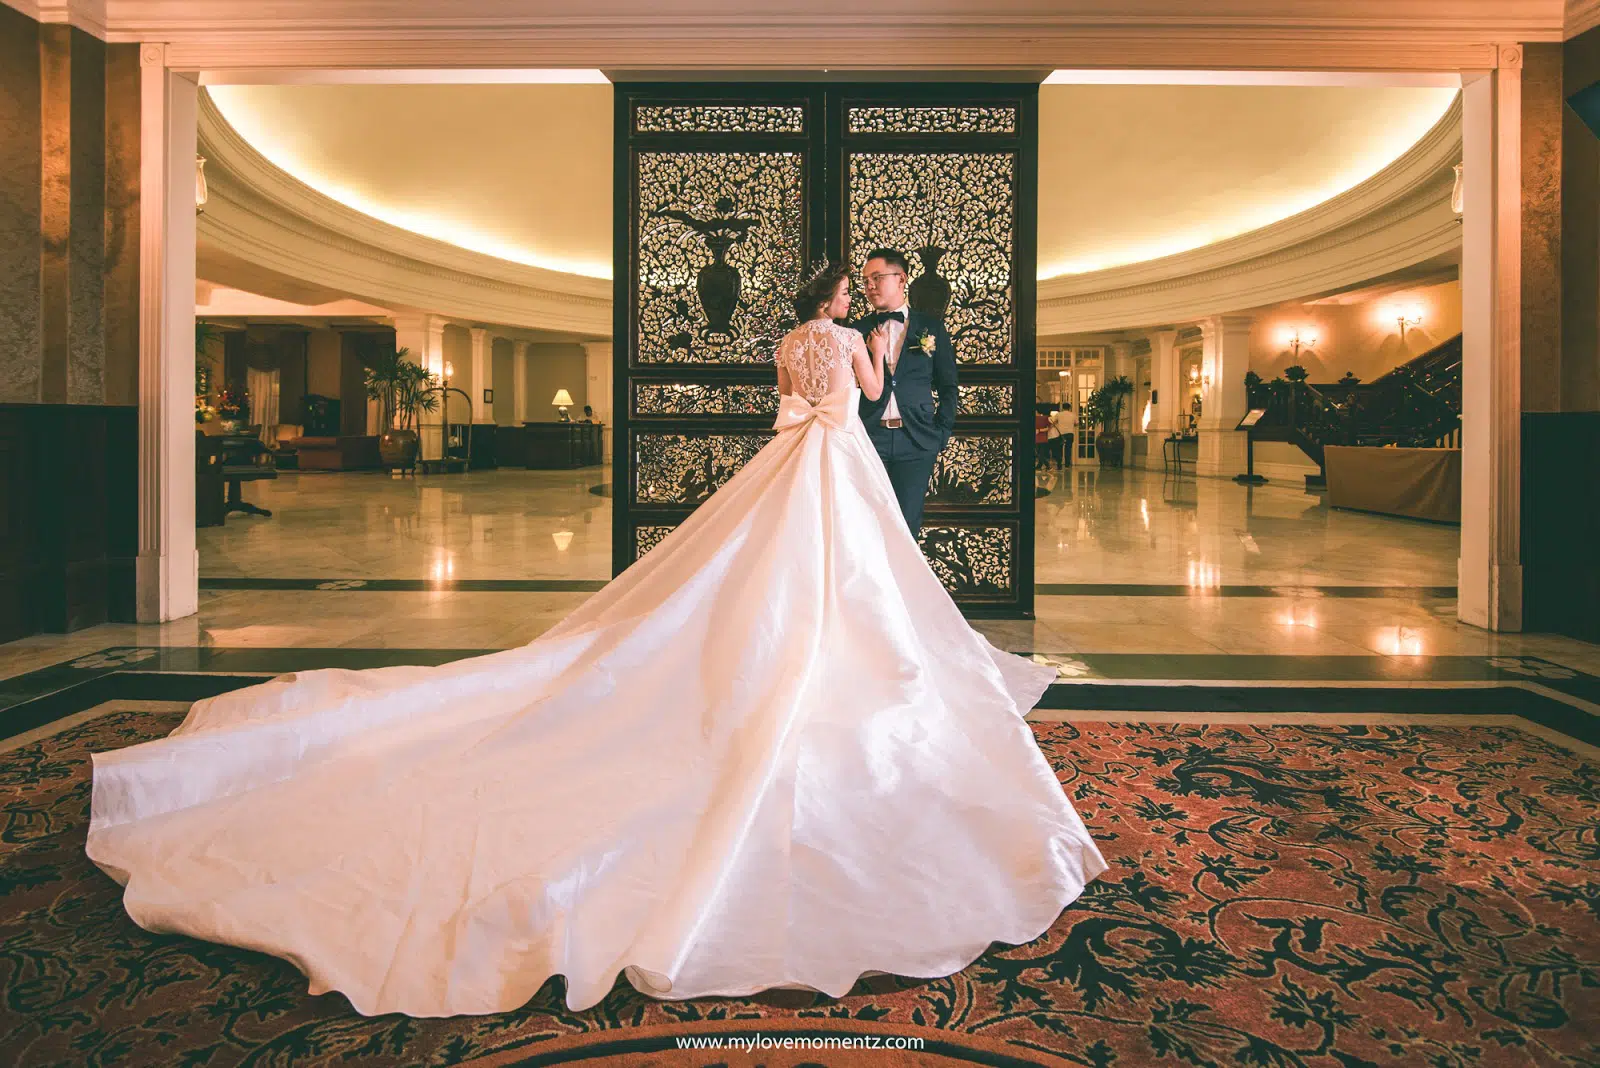 Bride and groom posing outside the ballroom of the E&amp;O Hotel in Penang, Malaysia. Photo by My Love Momentz